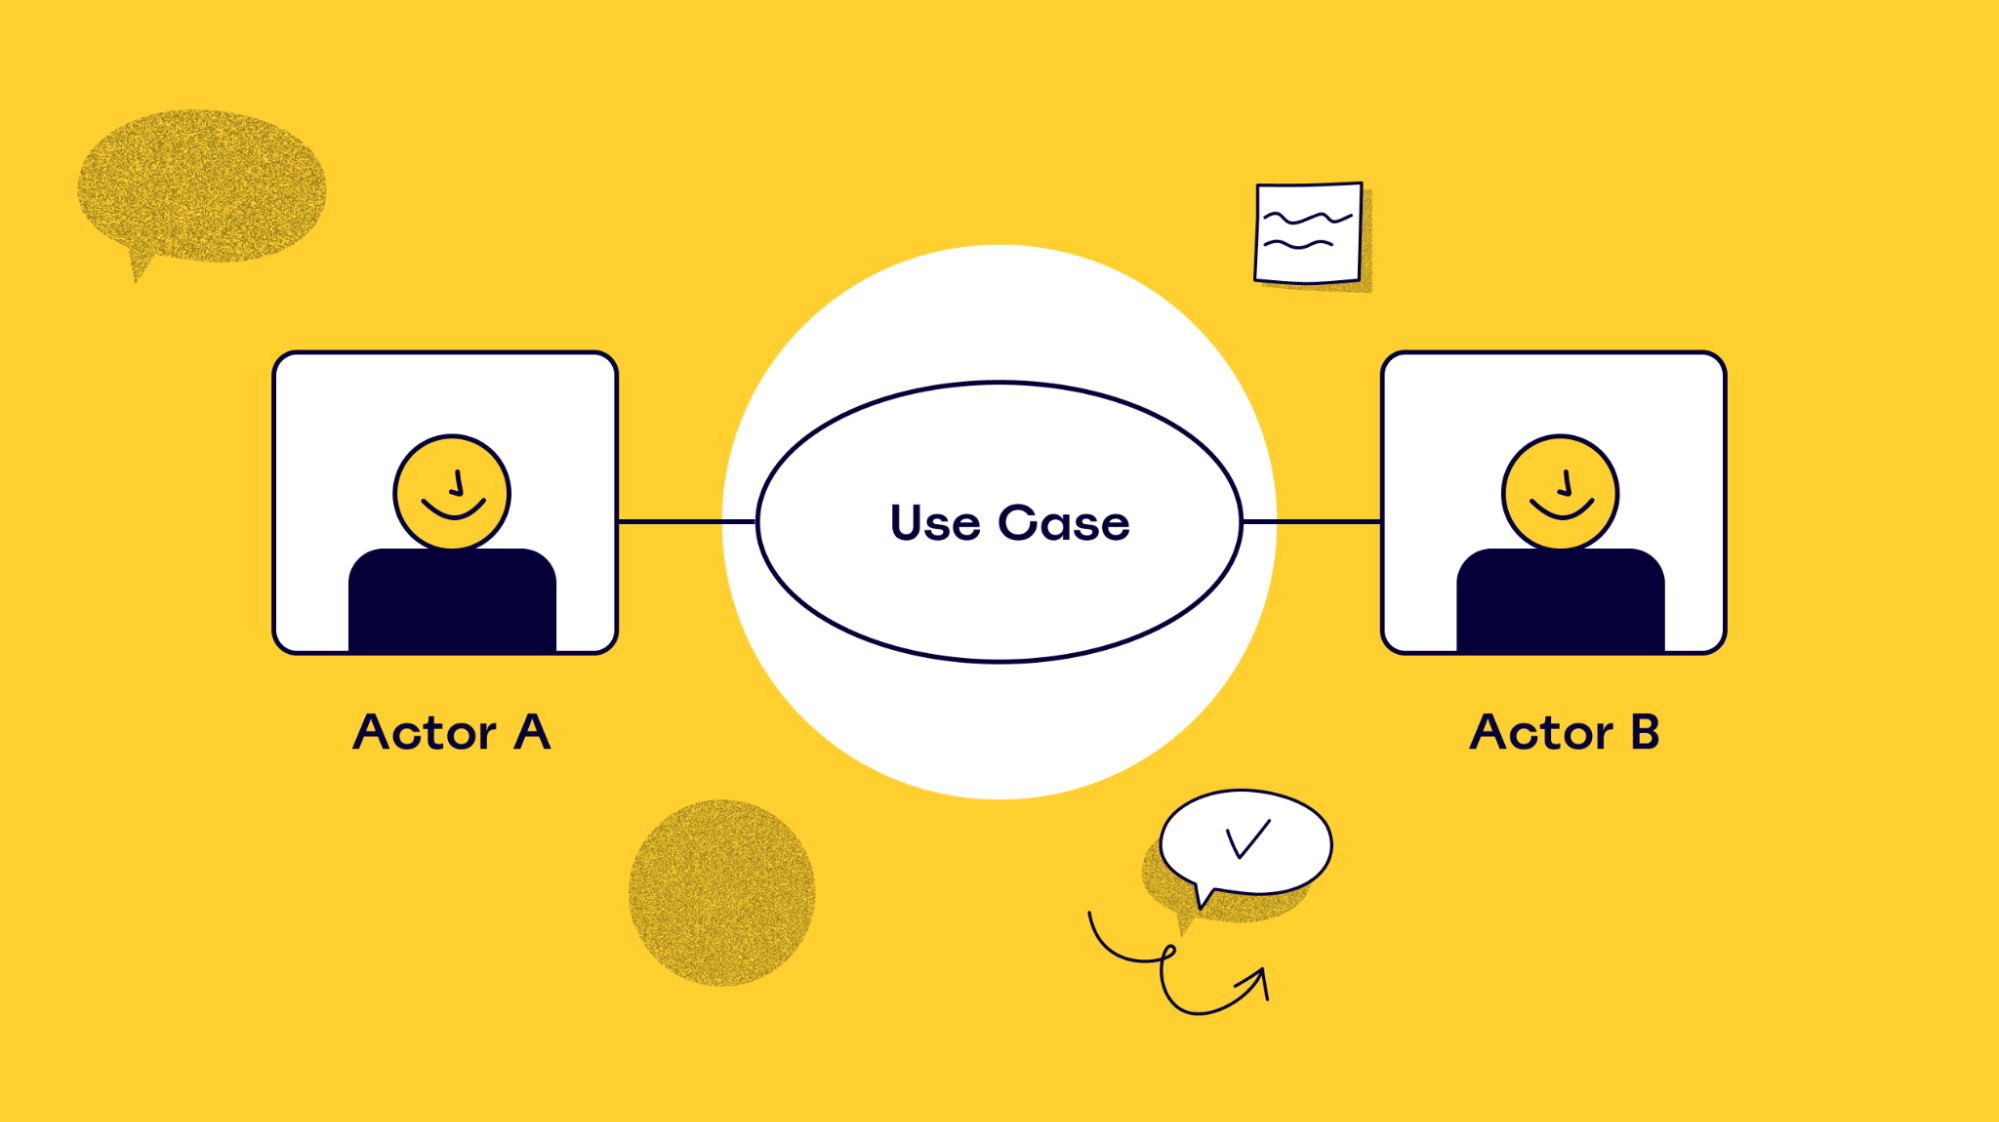 Image of the actor and use case icons in UML